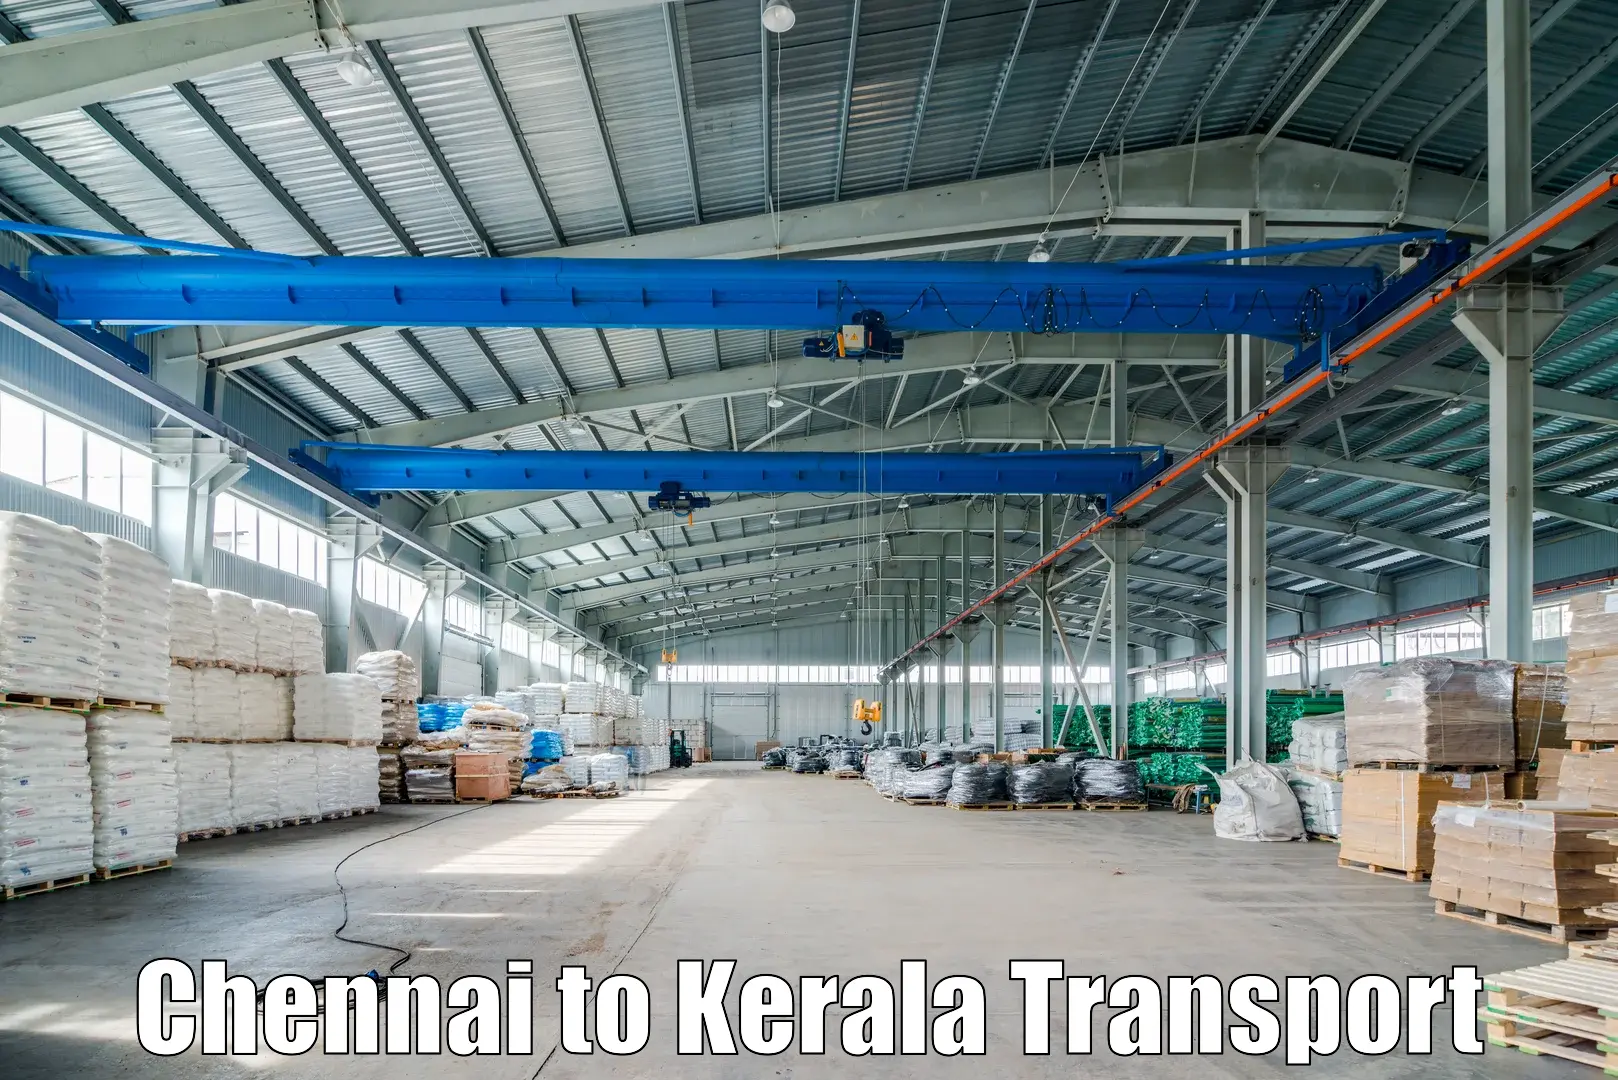 Daily parcel service transport in Chennai to Karukachal